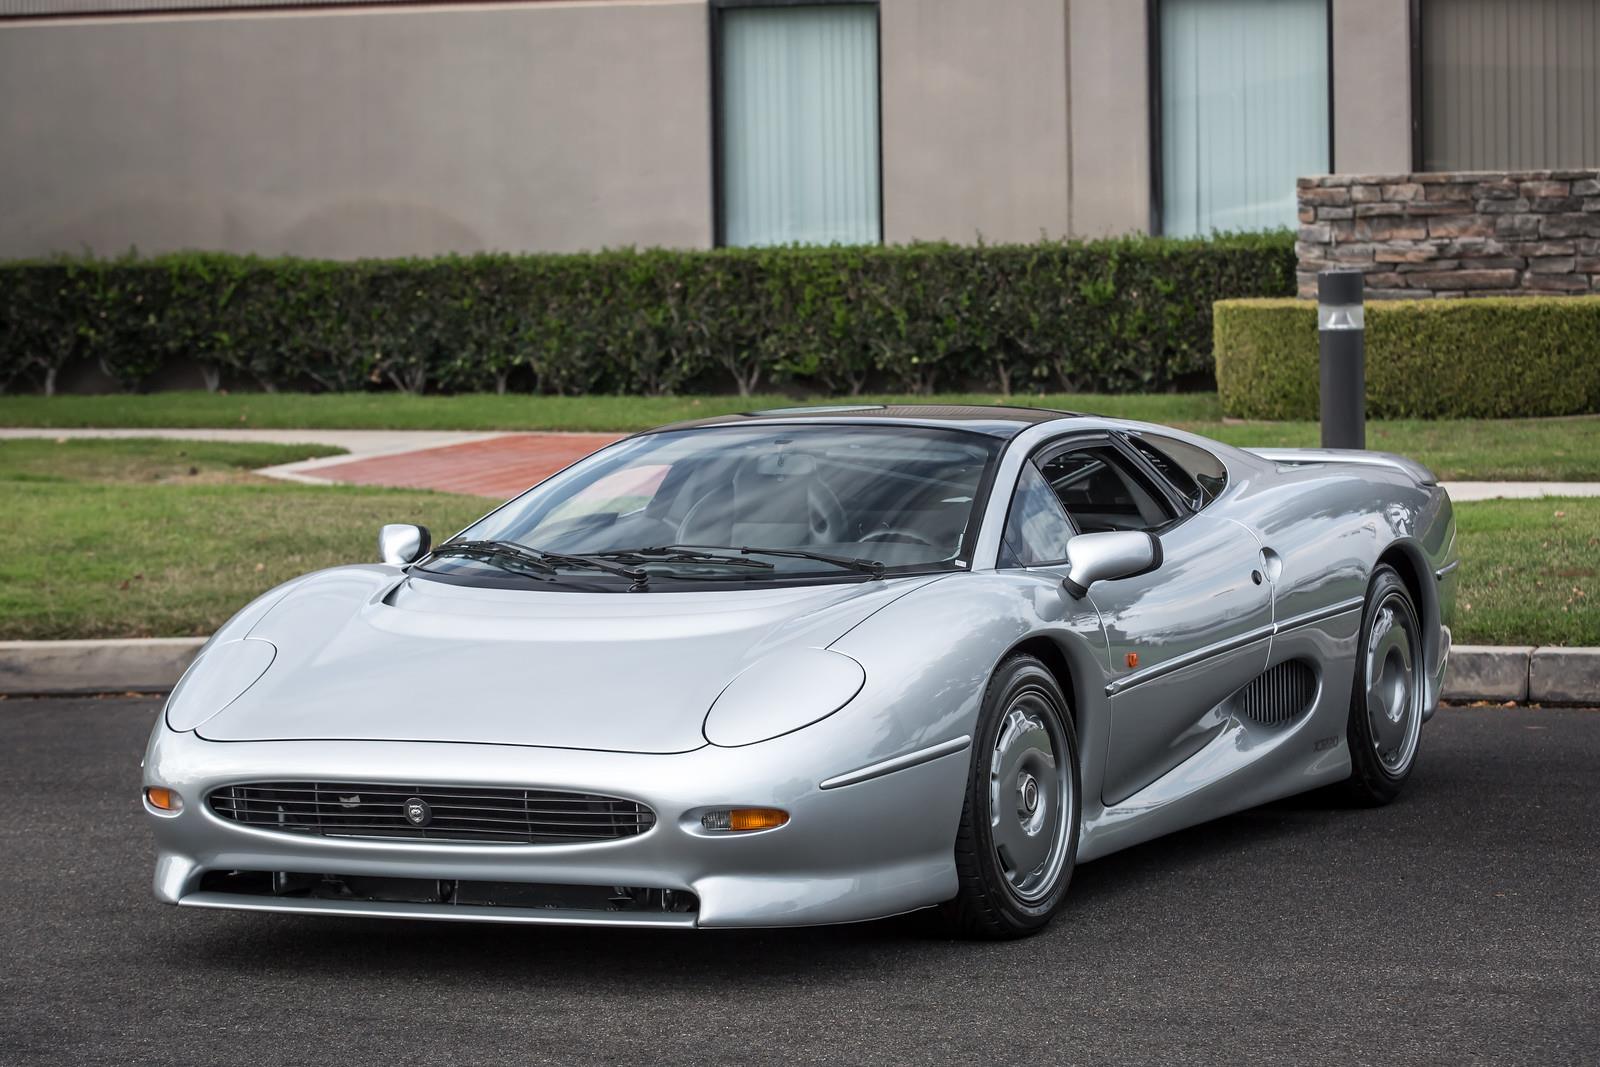 Rare Left Hand Drive Jaguar XJ220  For Sale in the US 